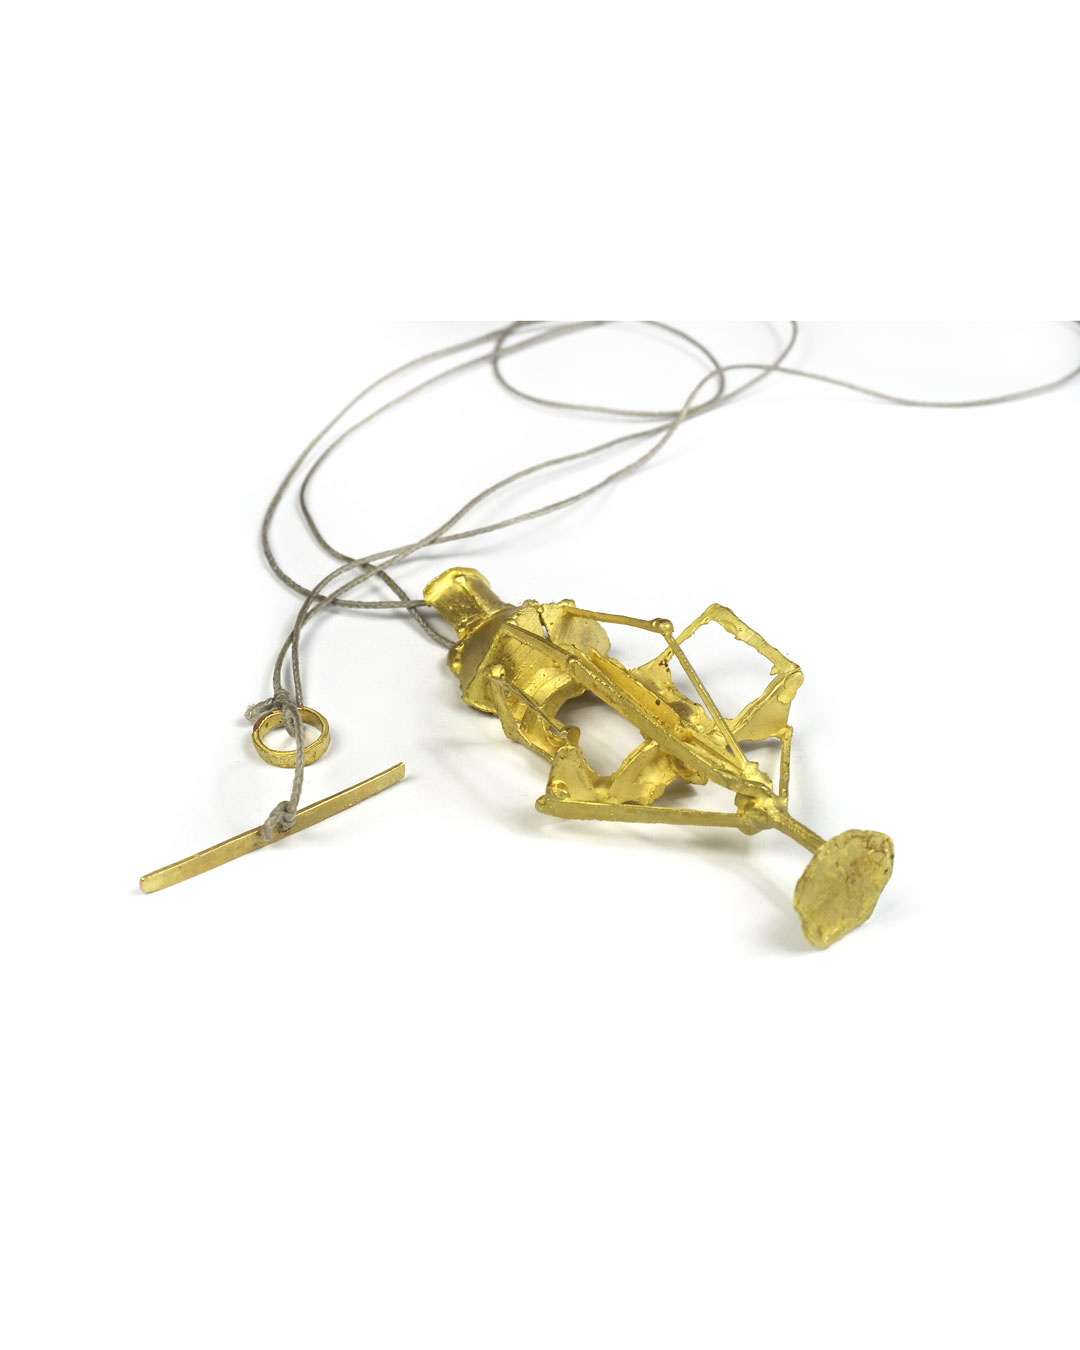 Andrea Wippermann, untitled, 1999, pendant; 14ct gold, nylon, 75 x 35 x 15 mm, €2900